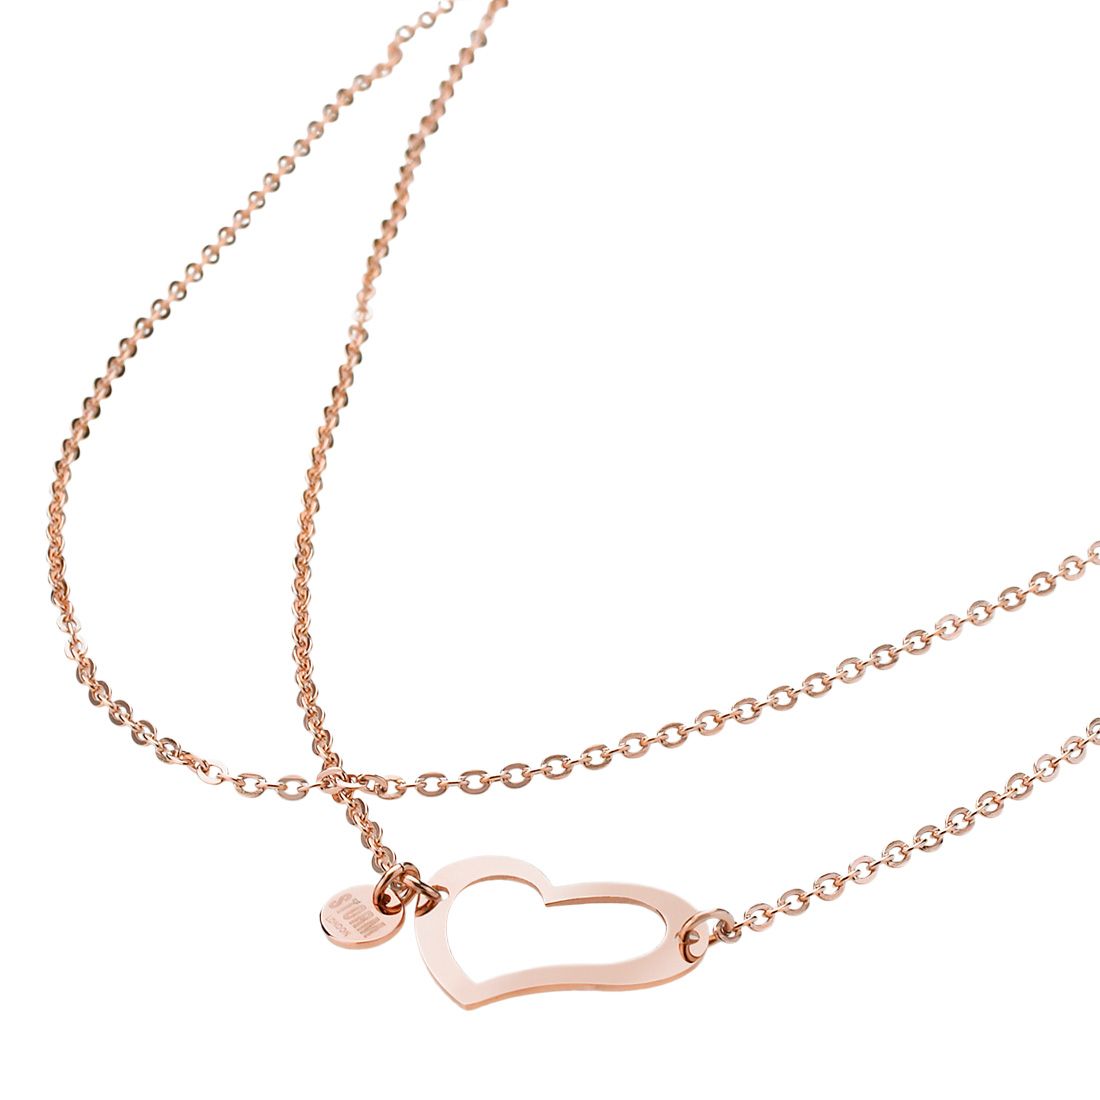 HEART NECKLACE ROSE GOLD